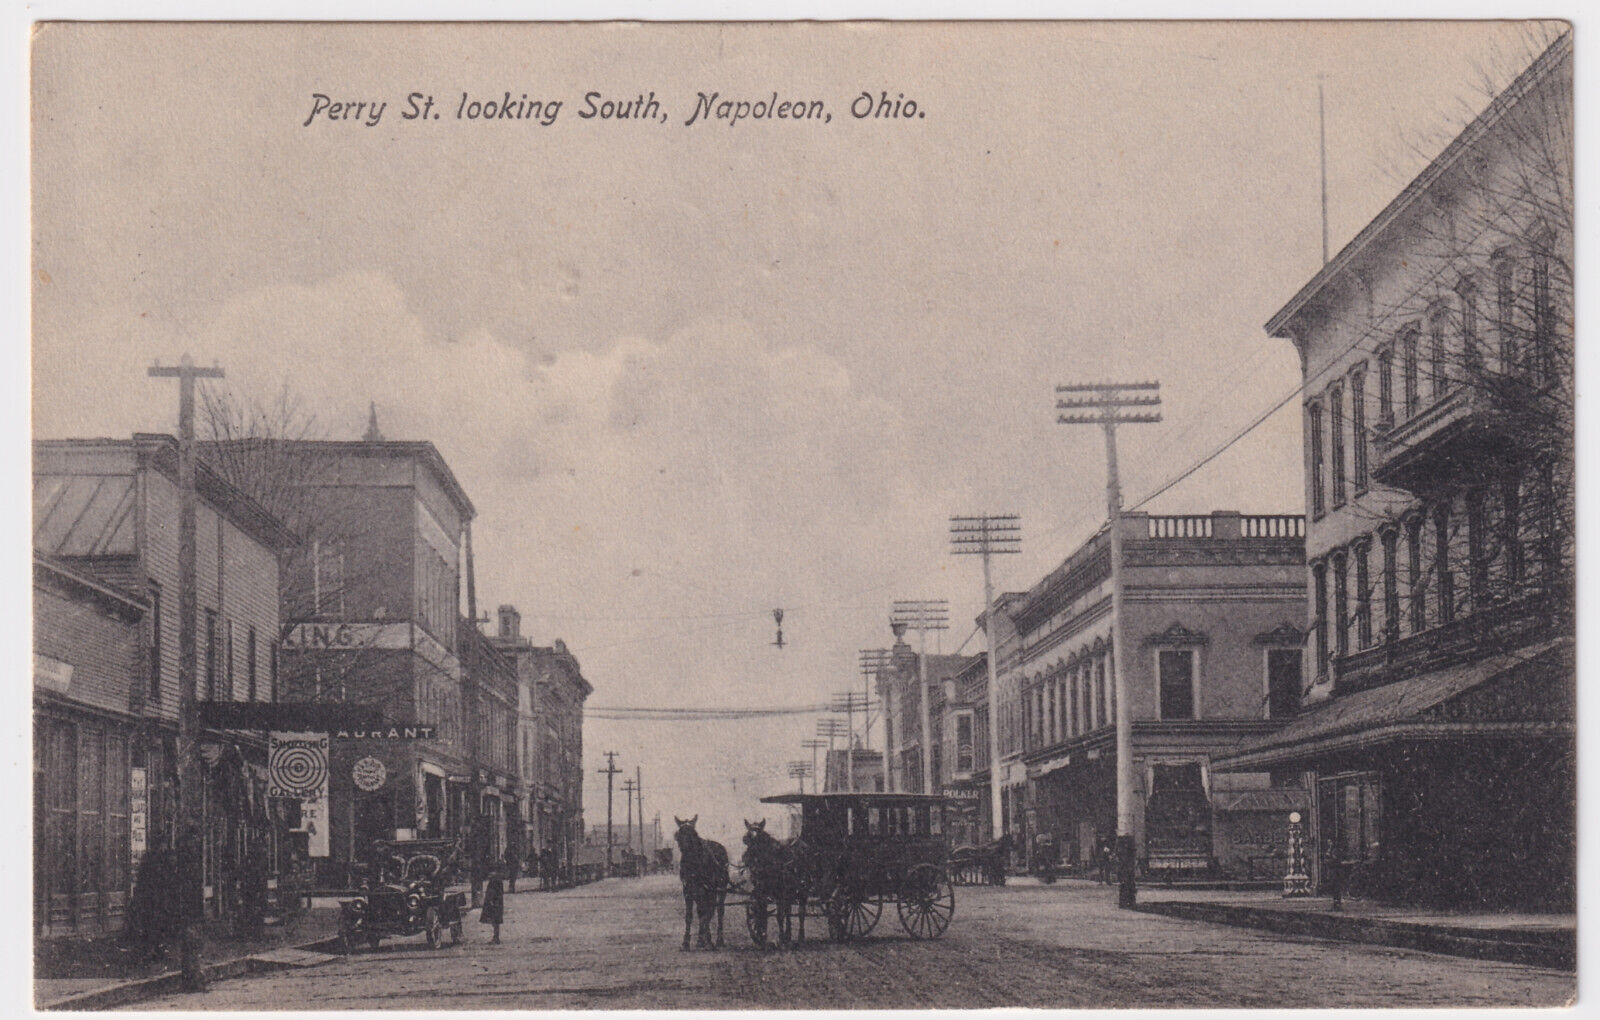 OHIO NAPOLEON PERRY ST VIEW SOUTH POSTED 1910 TO MORRIS PASS, MECHANICSBURG PA.